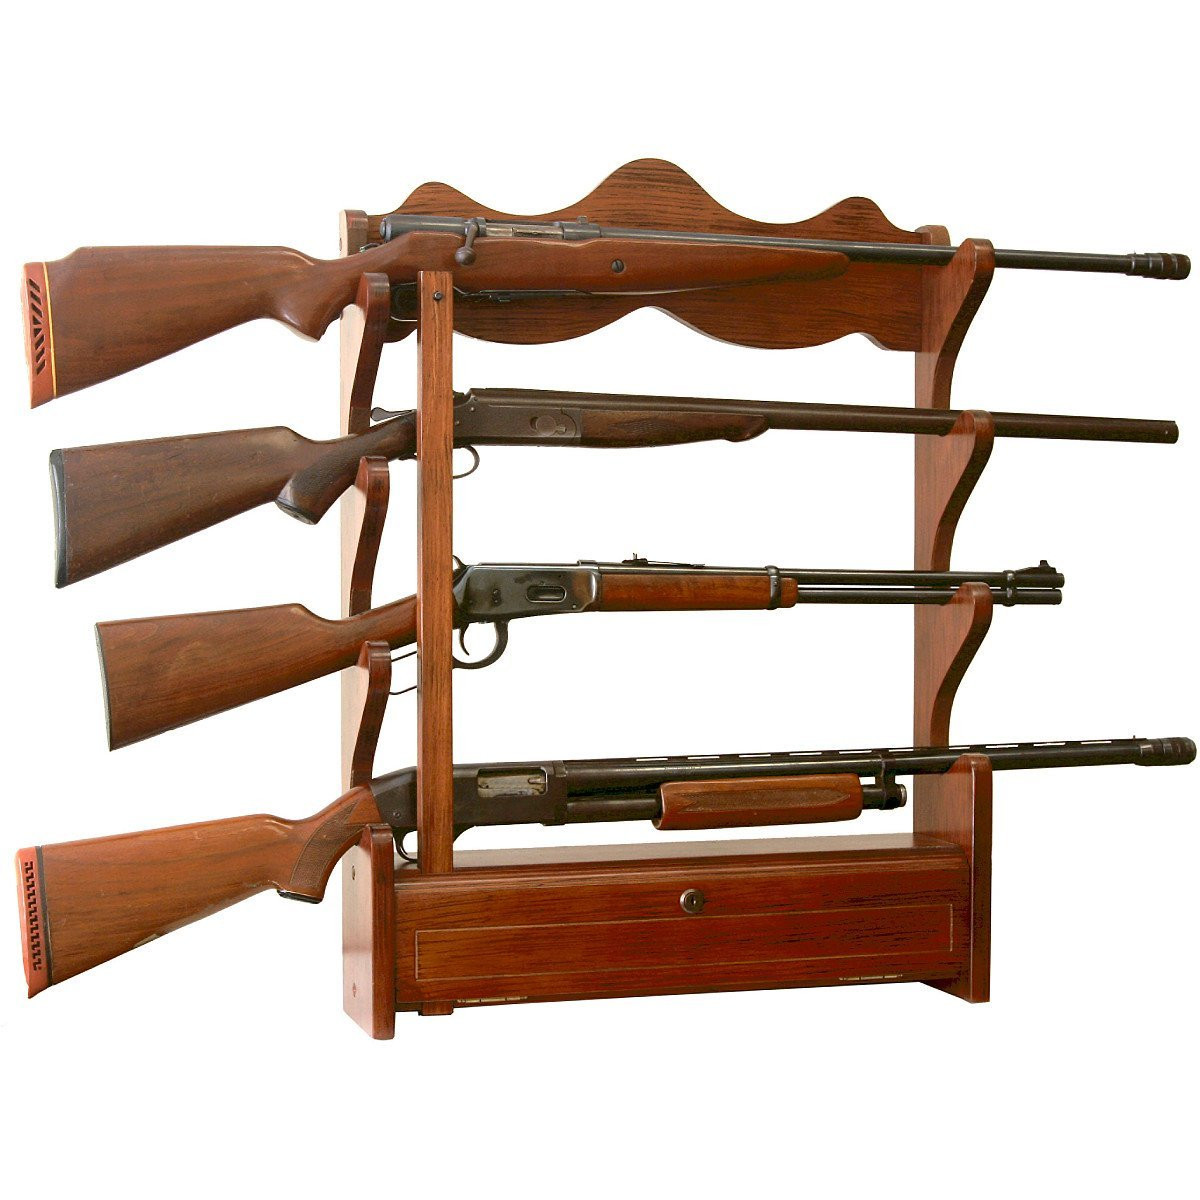 DIY Rifle Rack
 How To Build A Rifle Rack 9 Rifle Rack Woodworking Plans